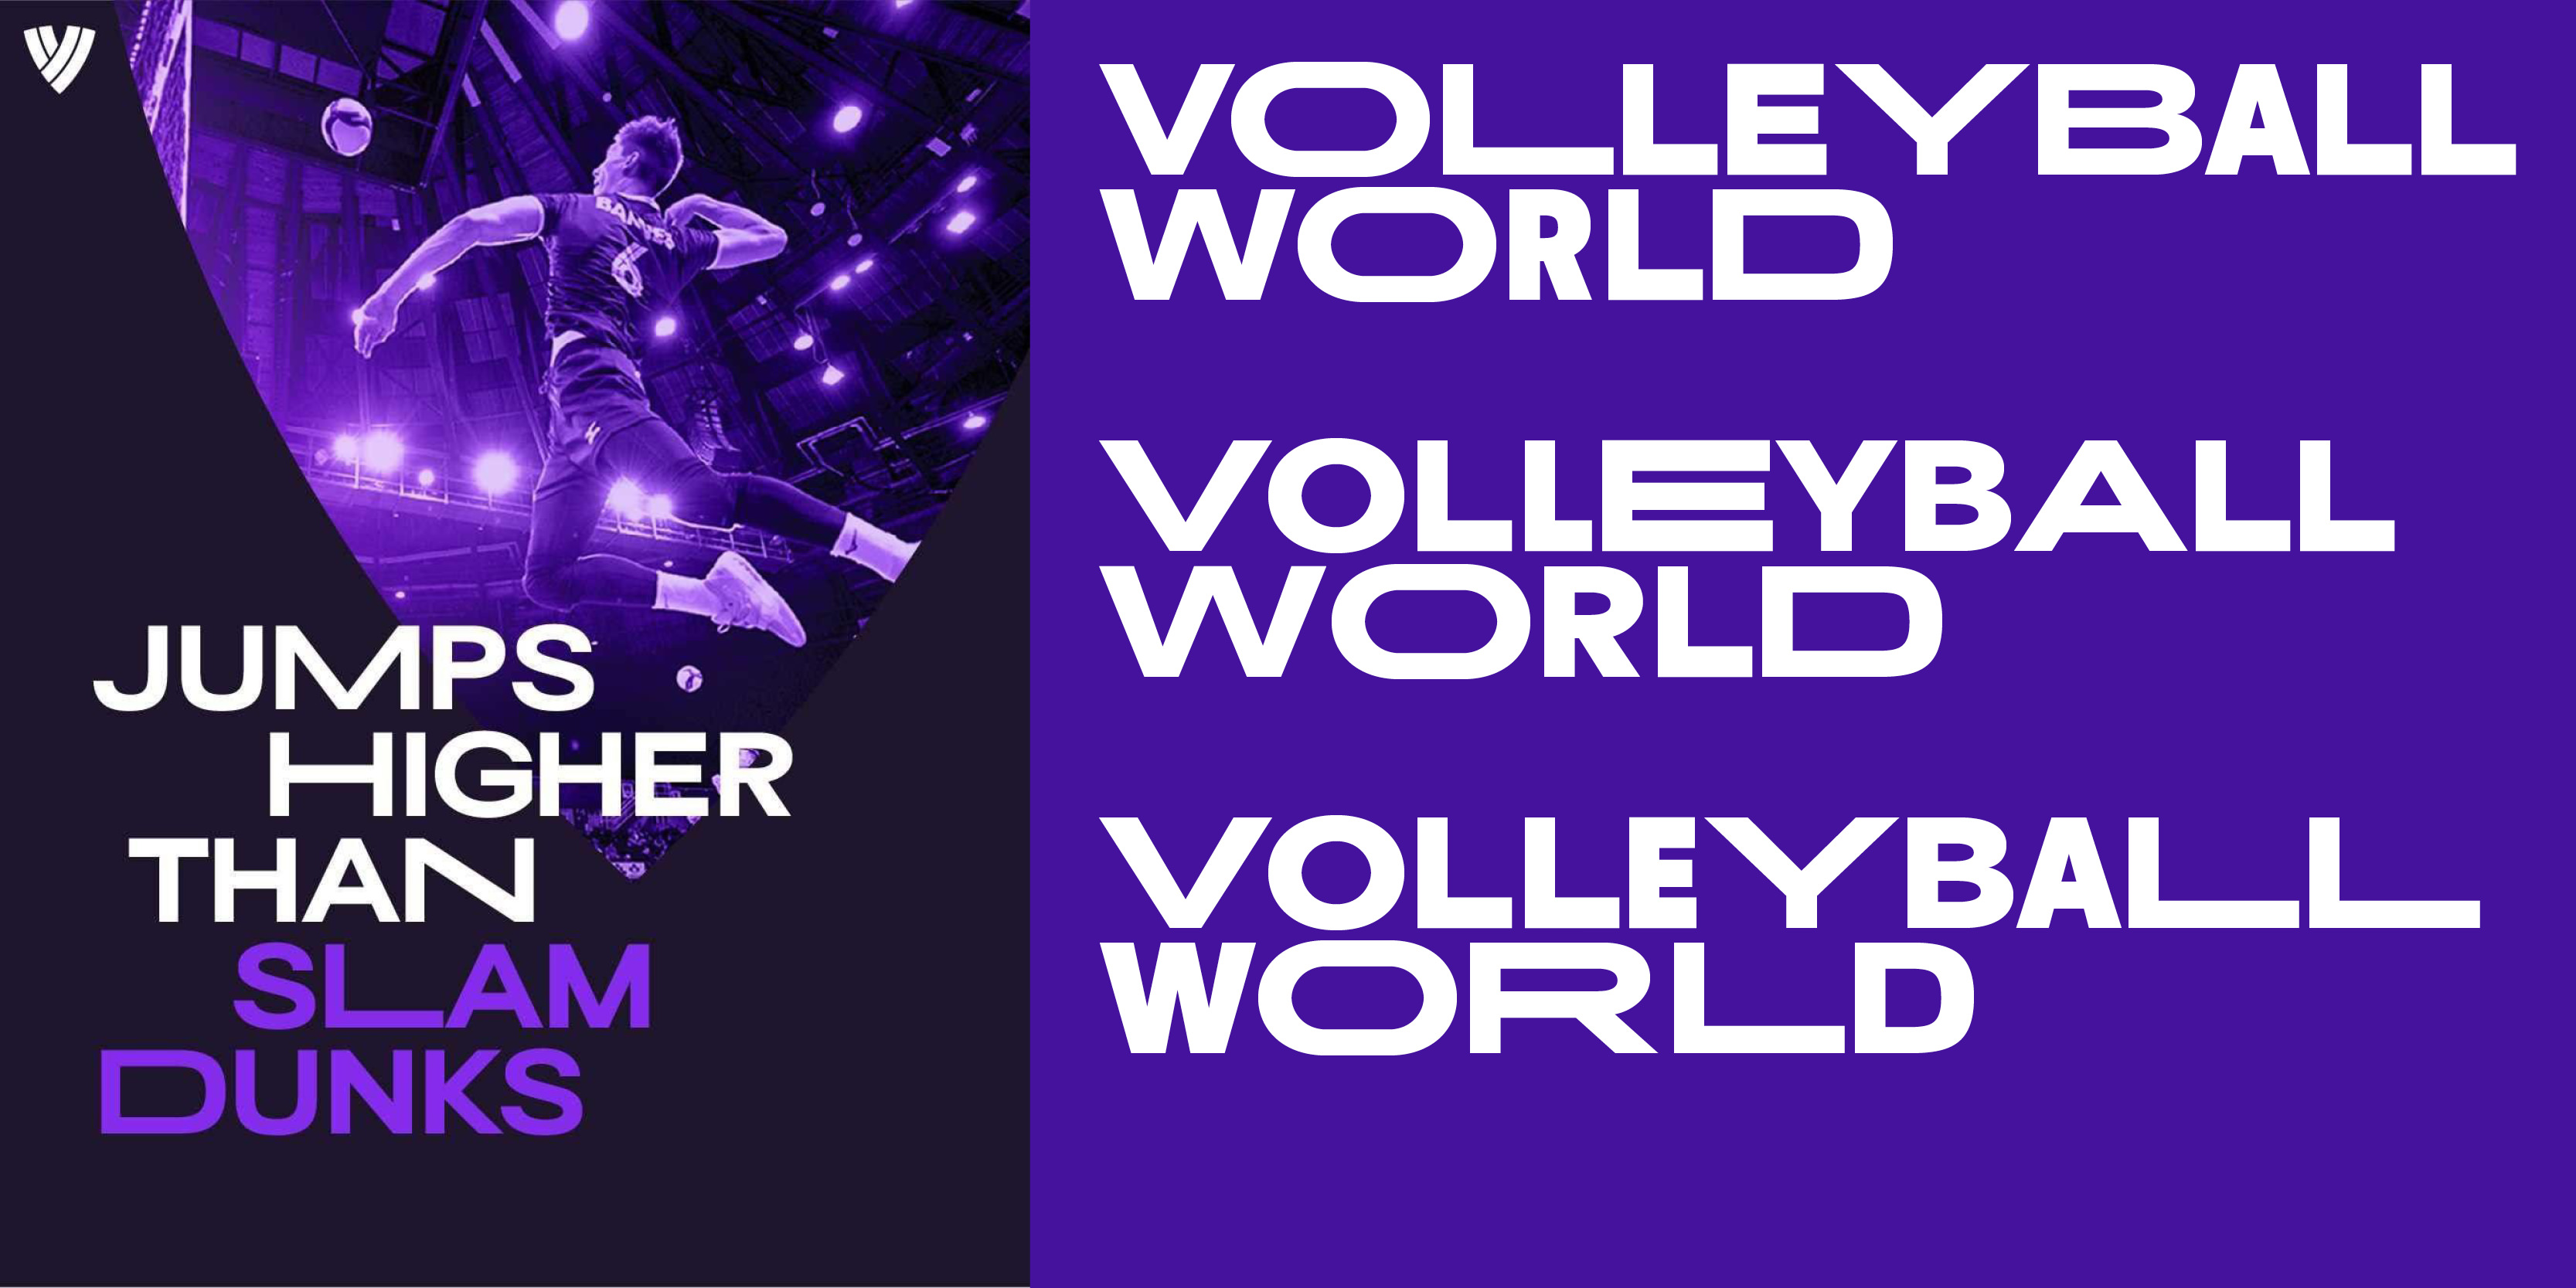 VolleyBall World is a custom font designed for Volleyball World company, commissioned by Ogilvy Amsterdam Lab, operating like a logo and for headline/display uses for this special identity.